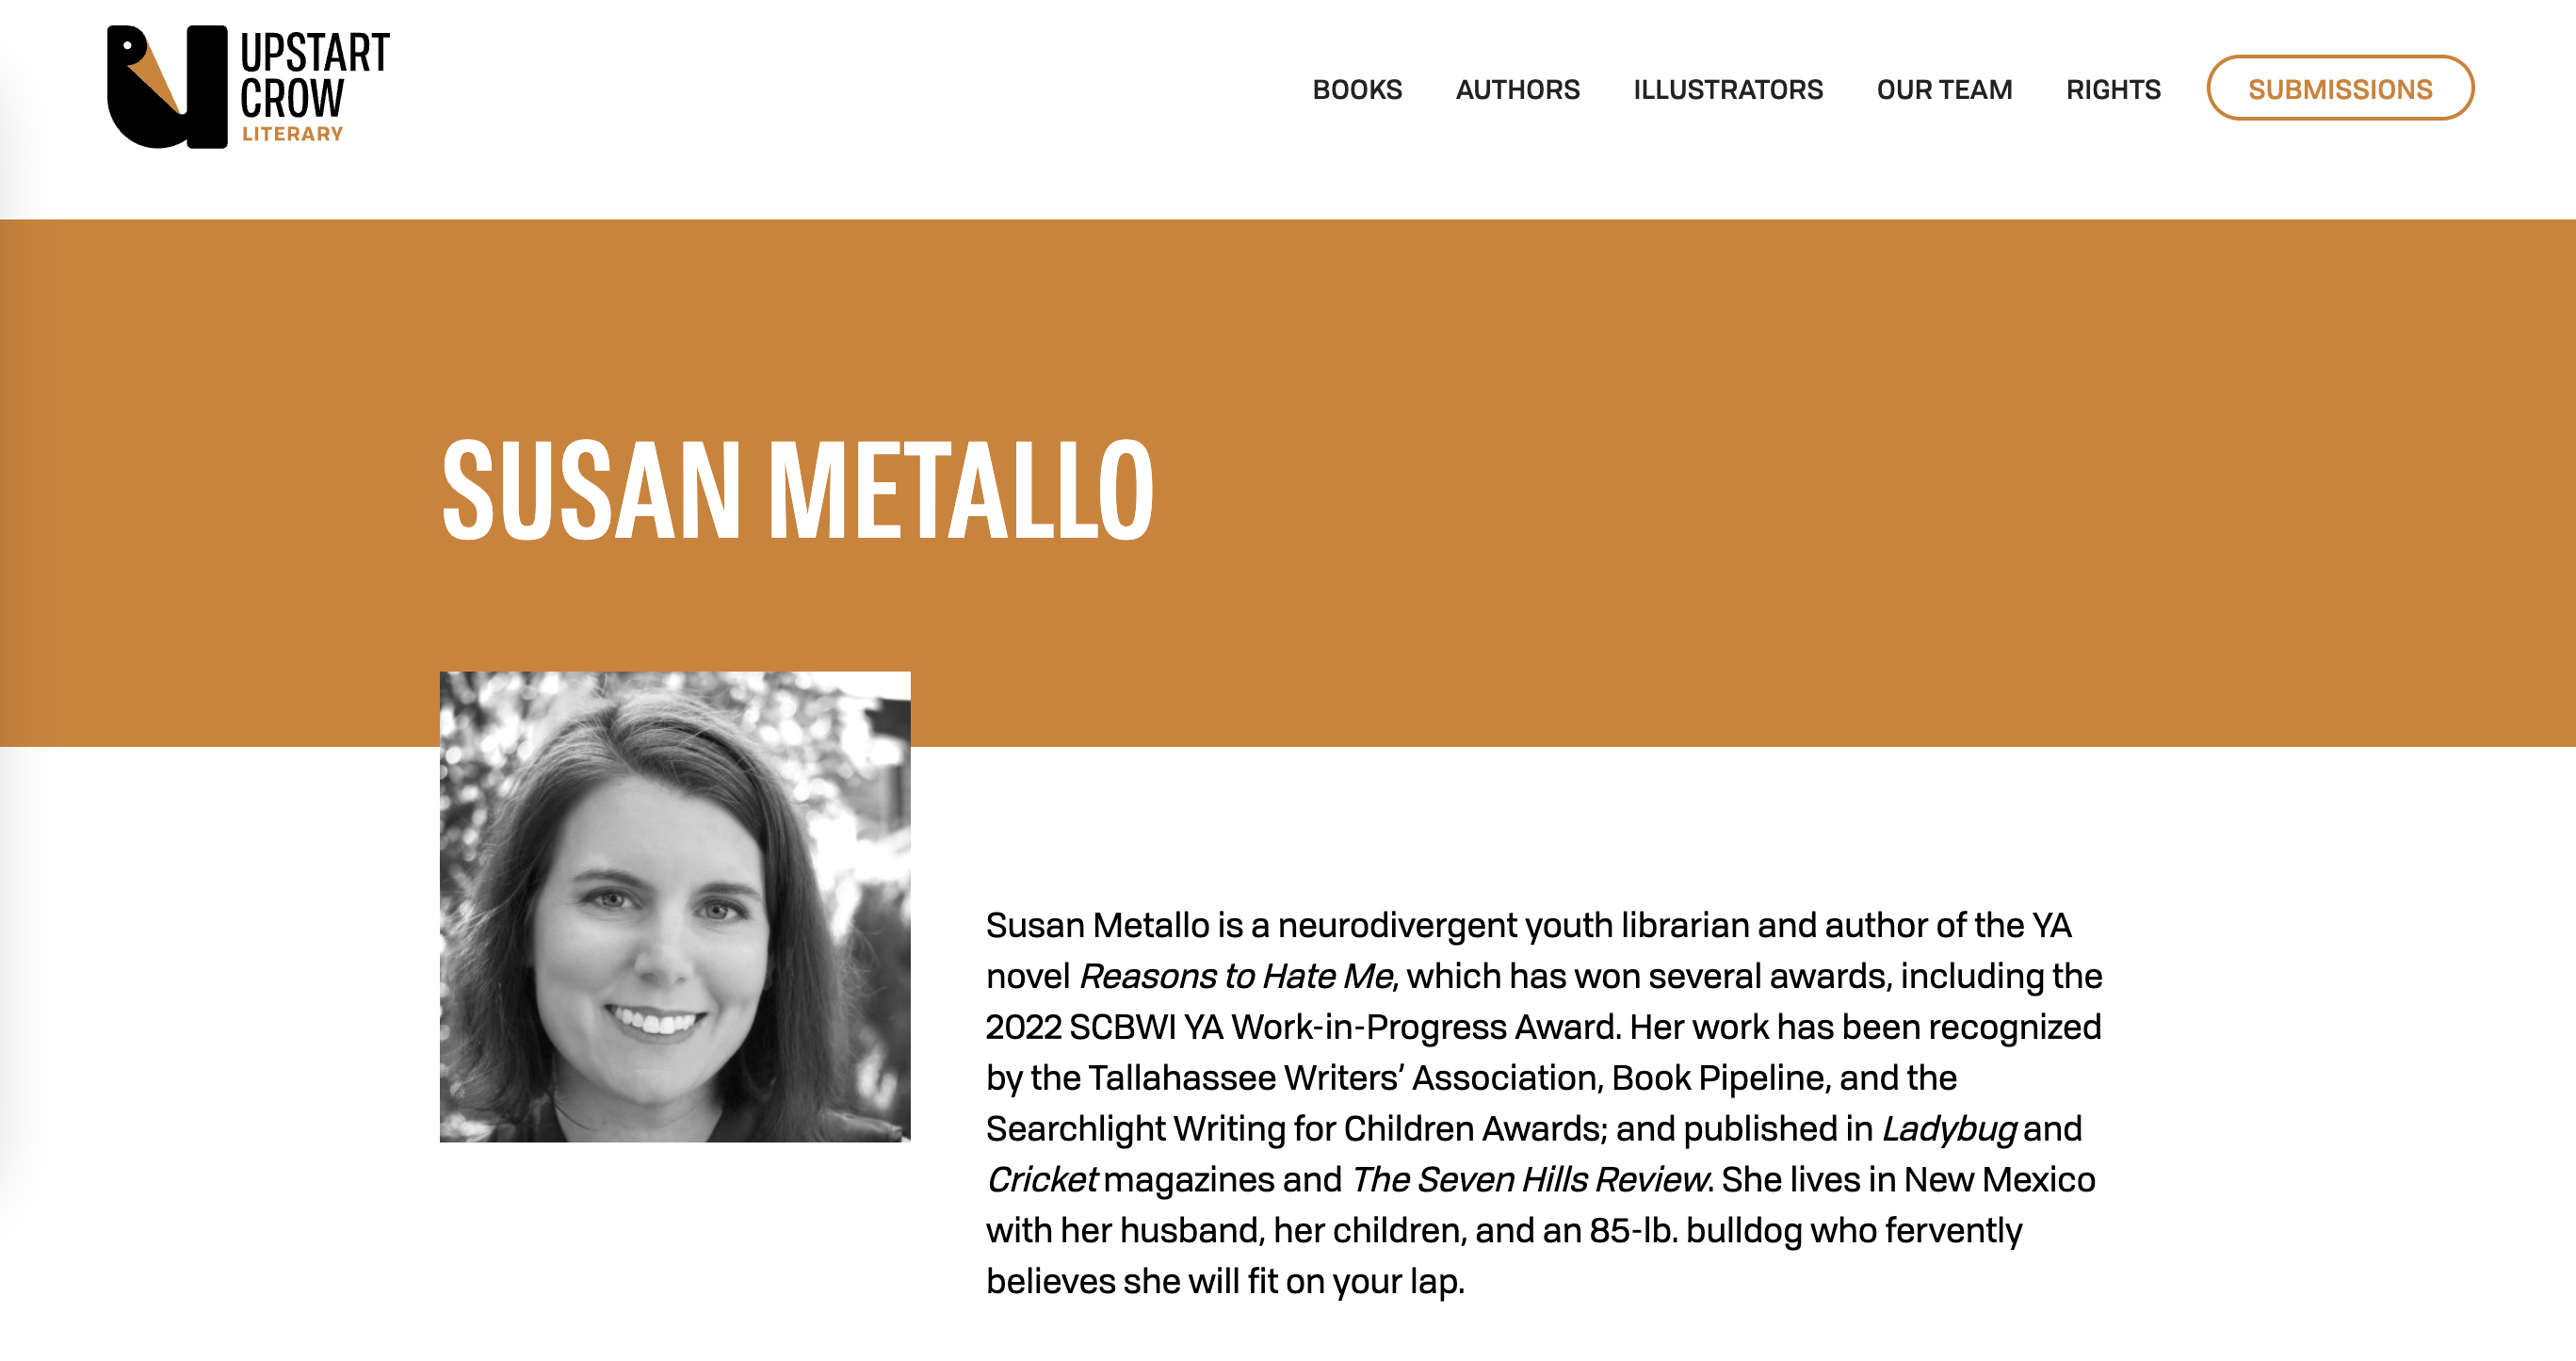 A screenshot shows the Upstart Crow Literary logo with a listing for Susan Metallo and her author photo and bio.